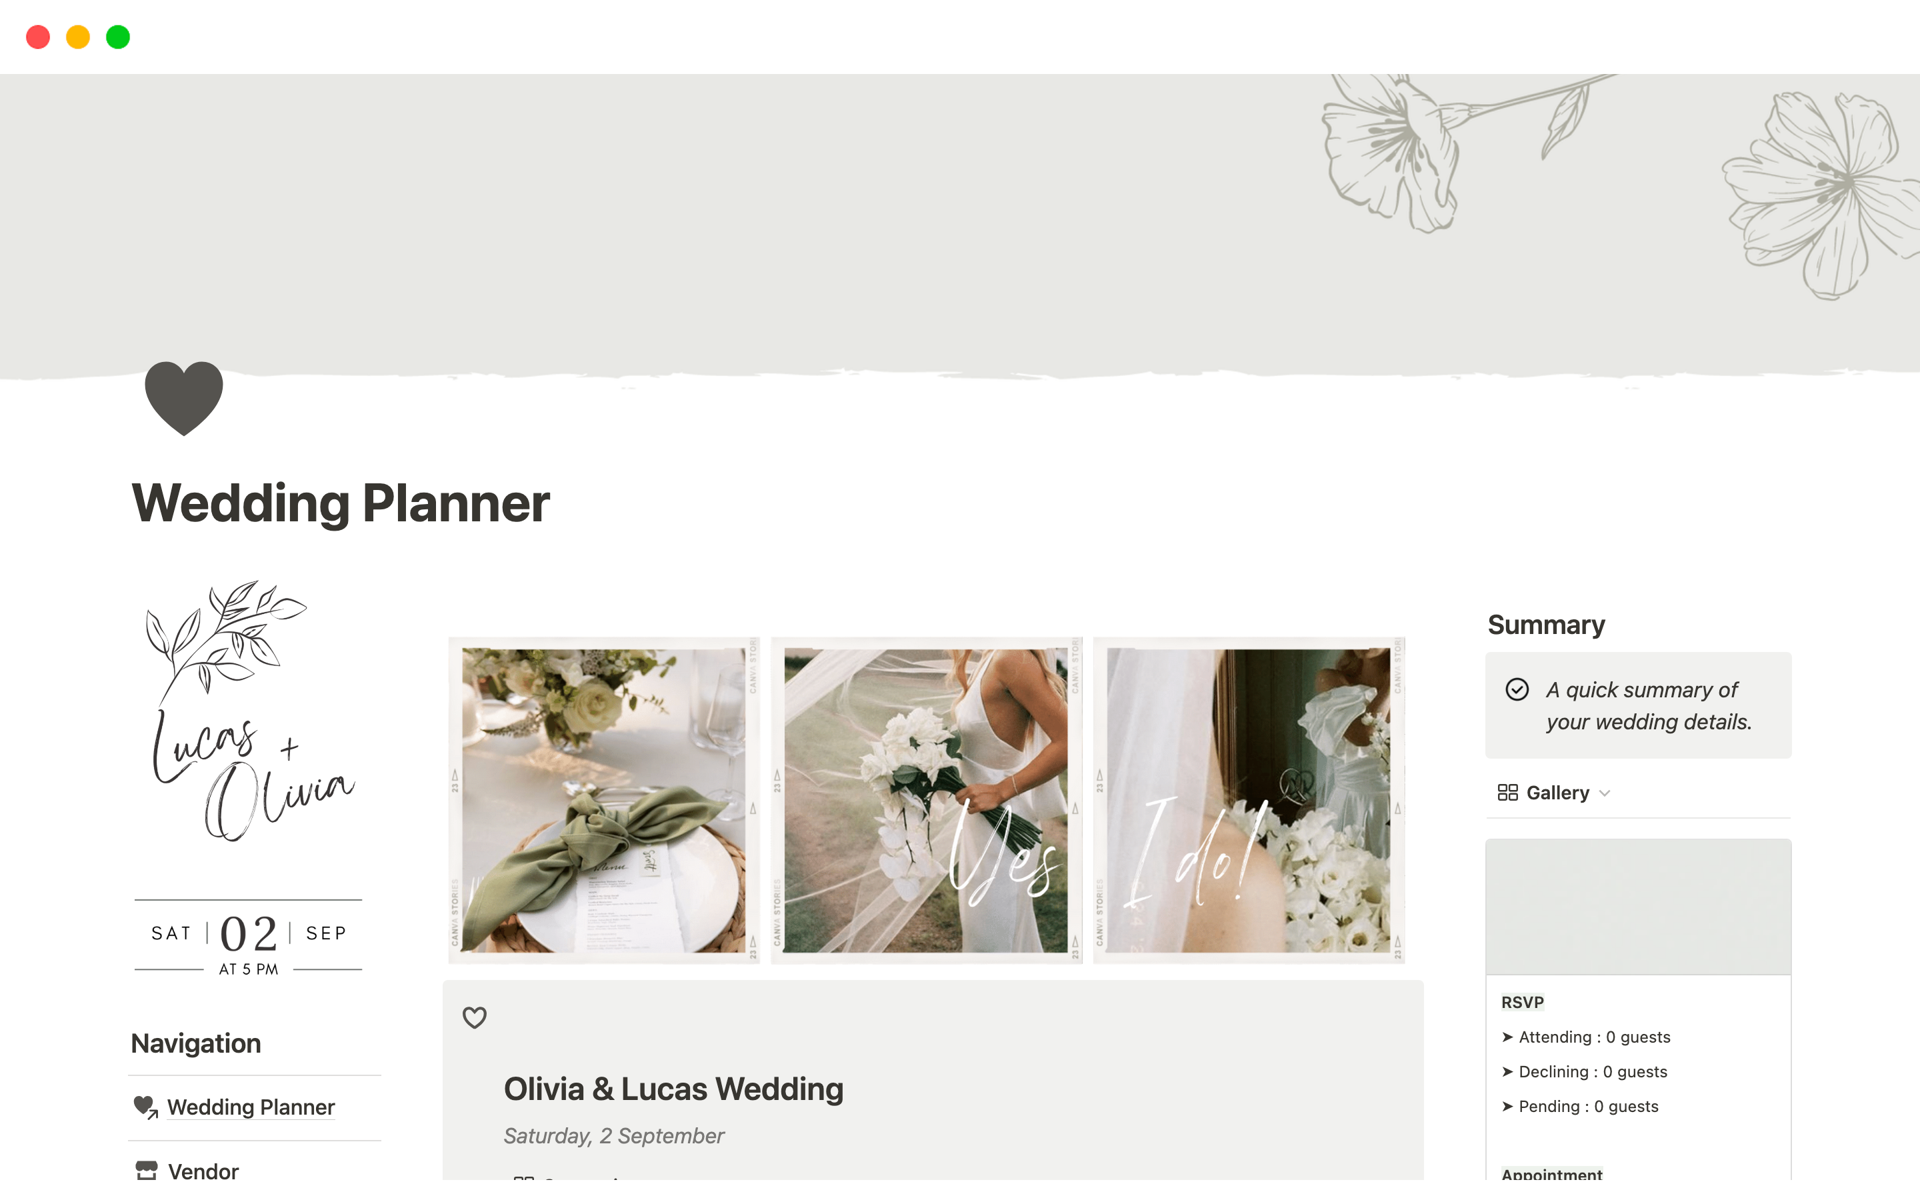 With this Notion wedding template, you'll have everything you need to plan your dream wedding. 